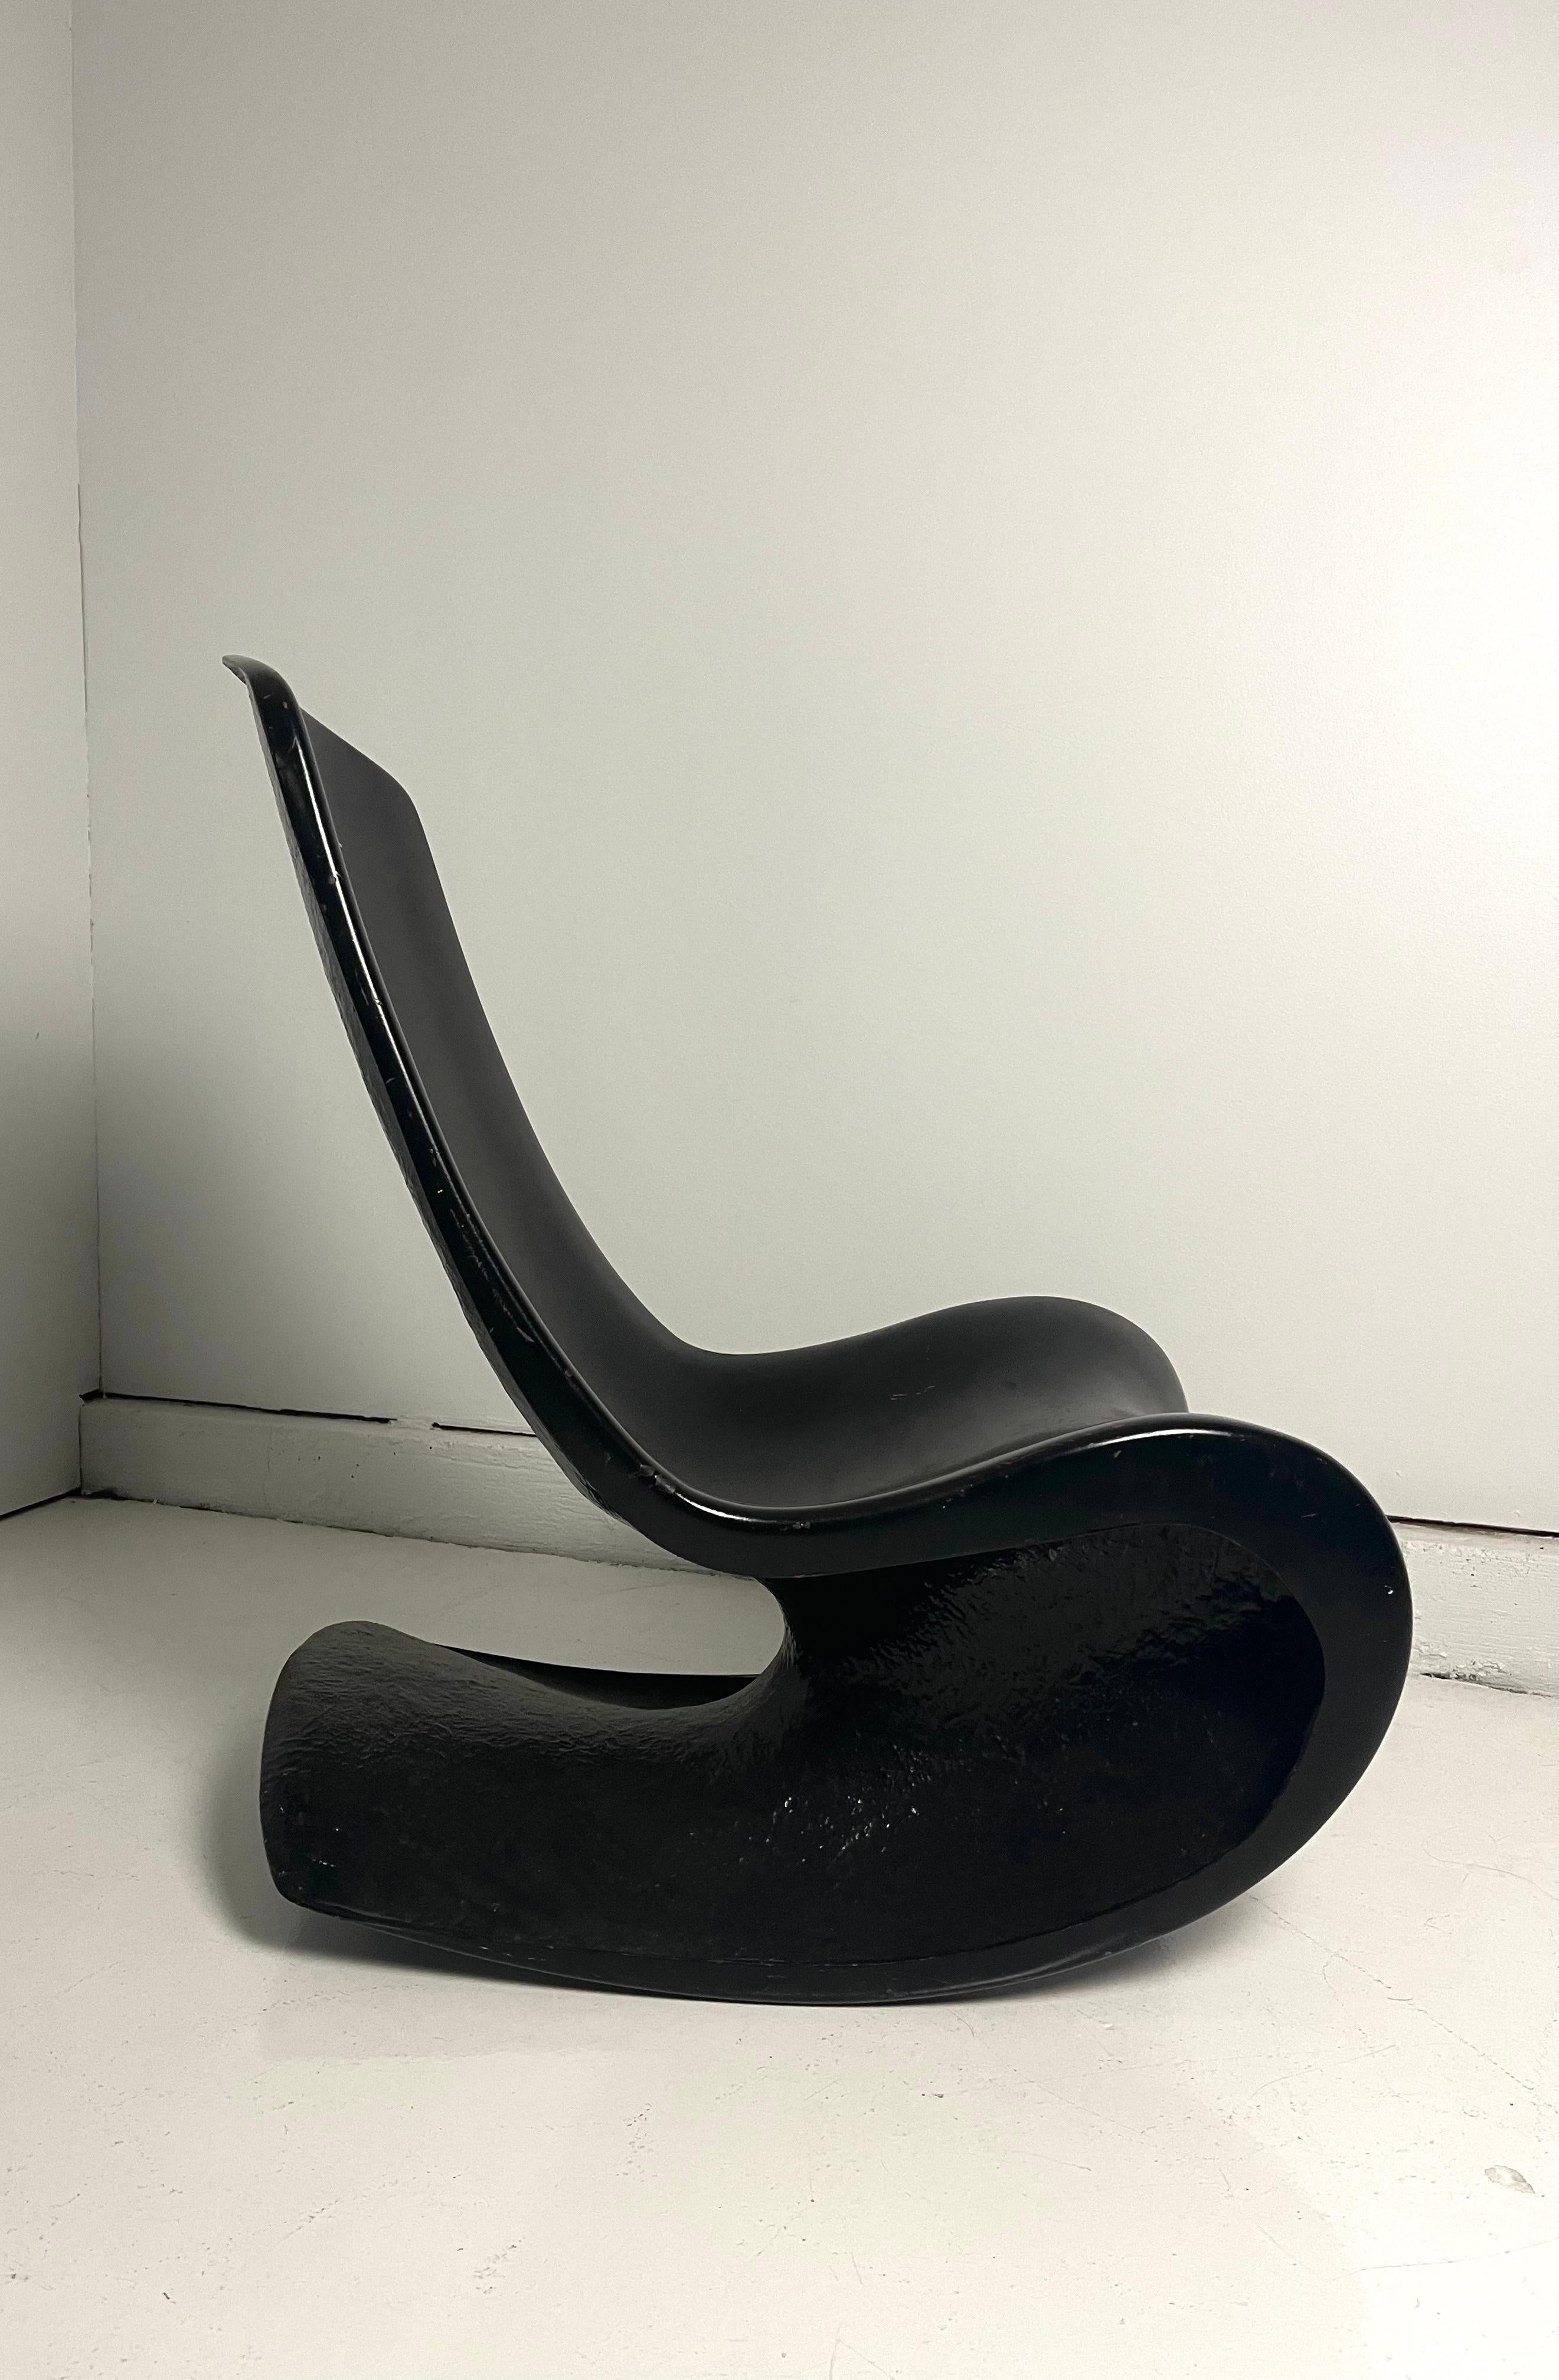 Custom one of a kind fiberglass rocker. Stylish and completely unique this surprisingly comfortable rocker can slide into any-style interior (or outdoor space) with ease. Shows some wear to body of chair. Can be professionally redone with auto-paint